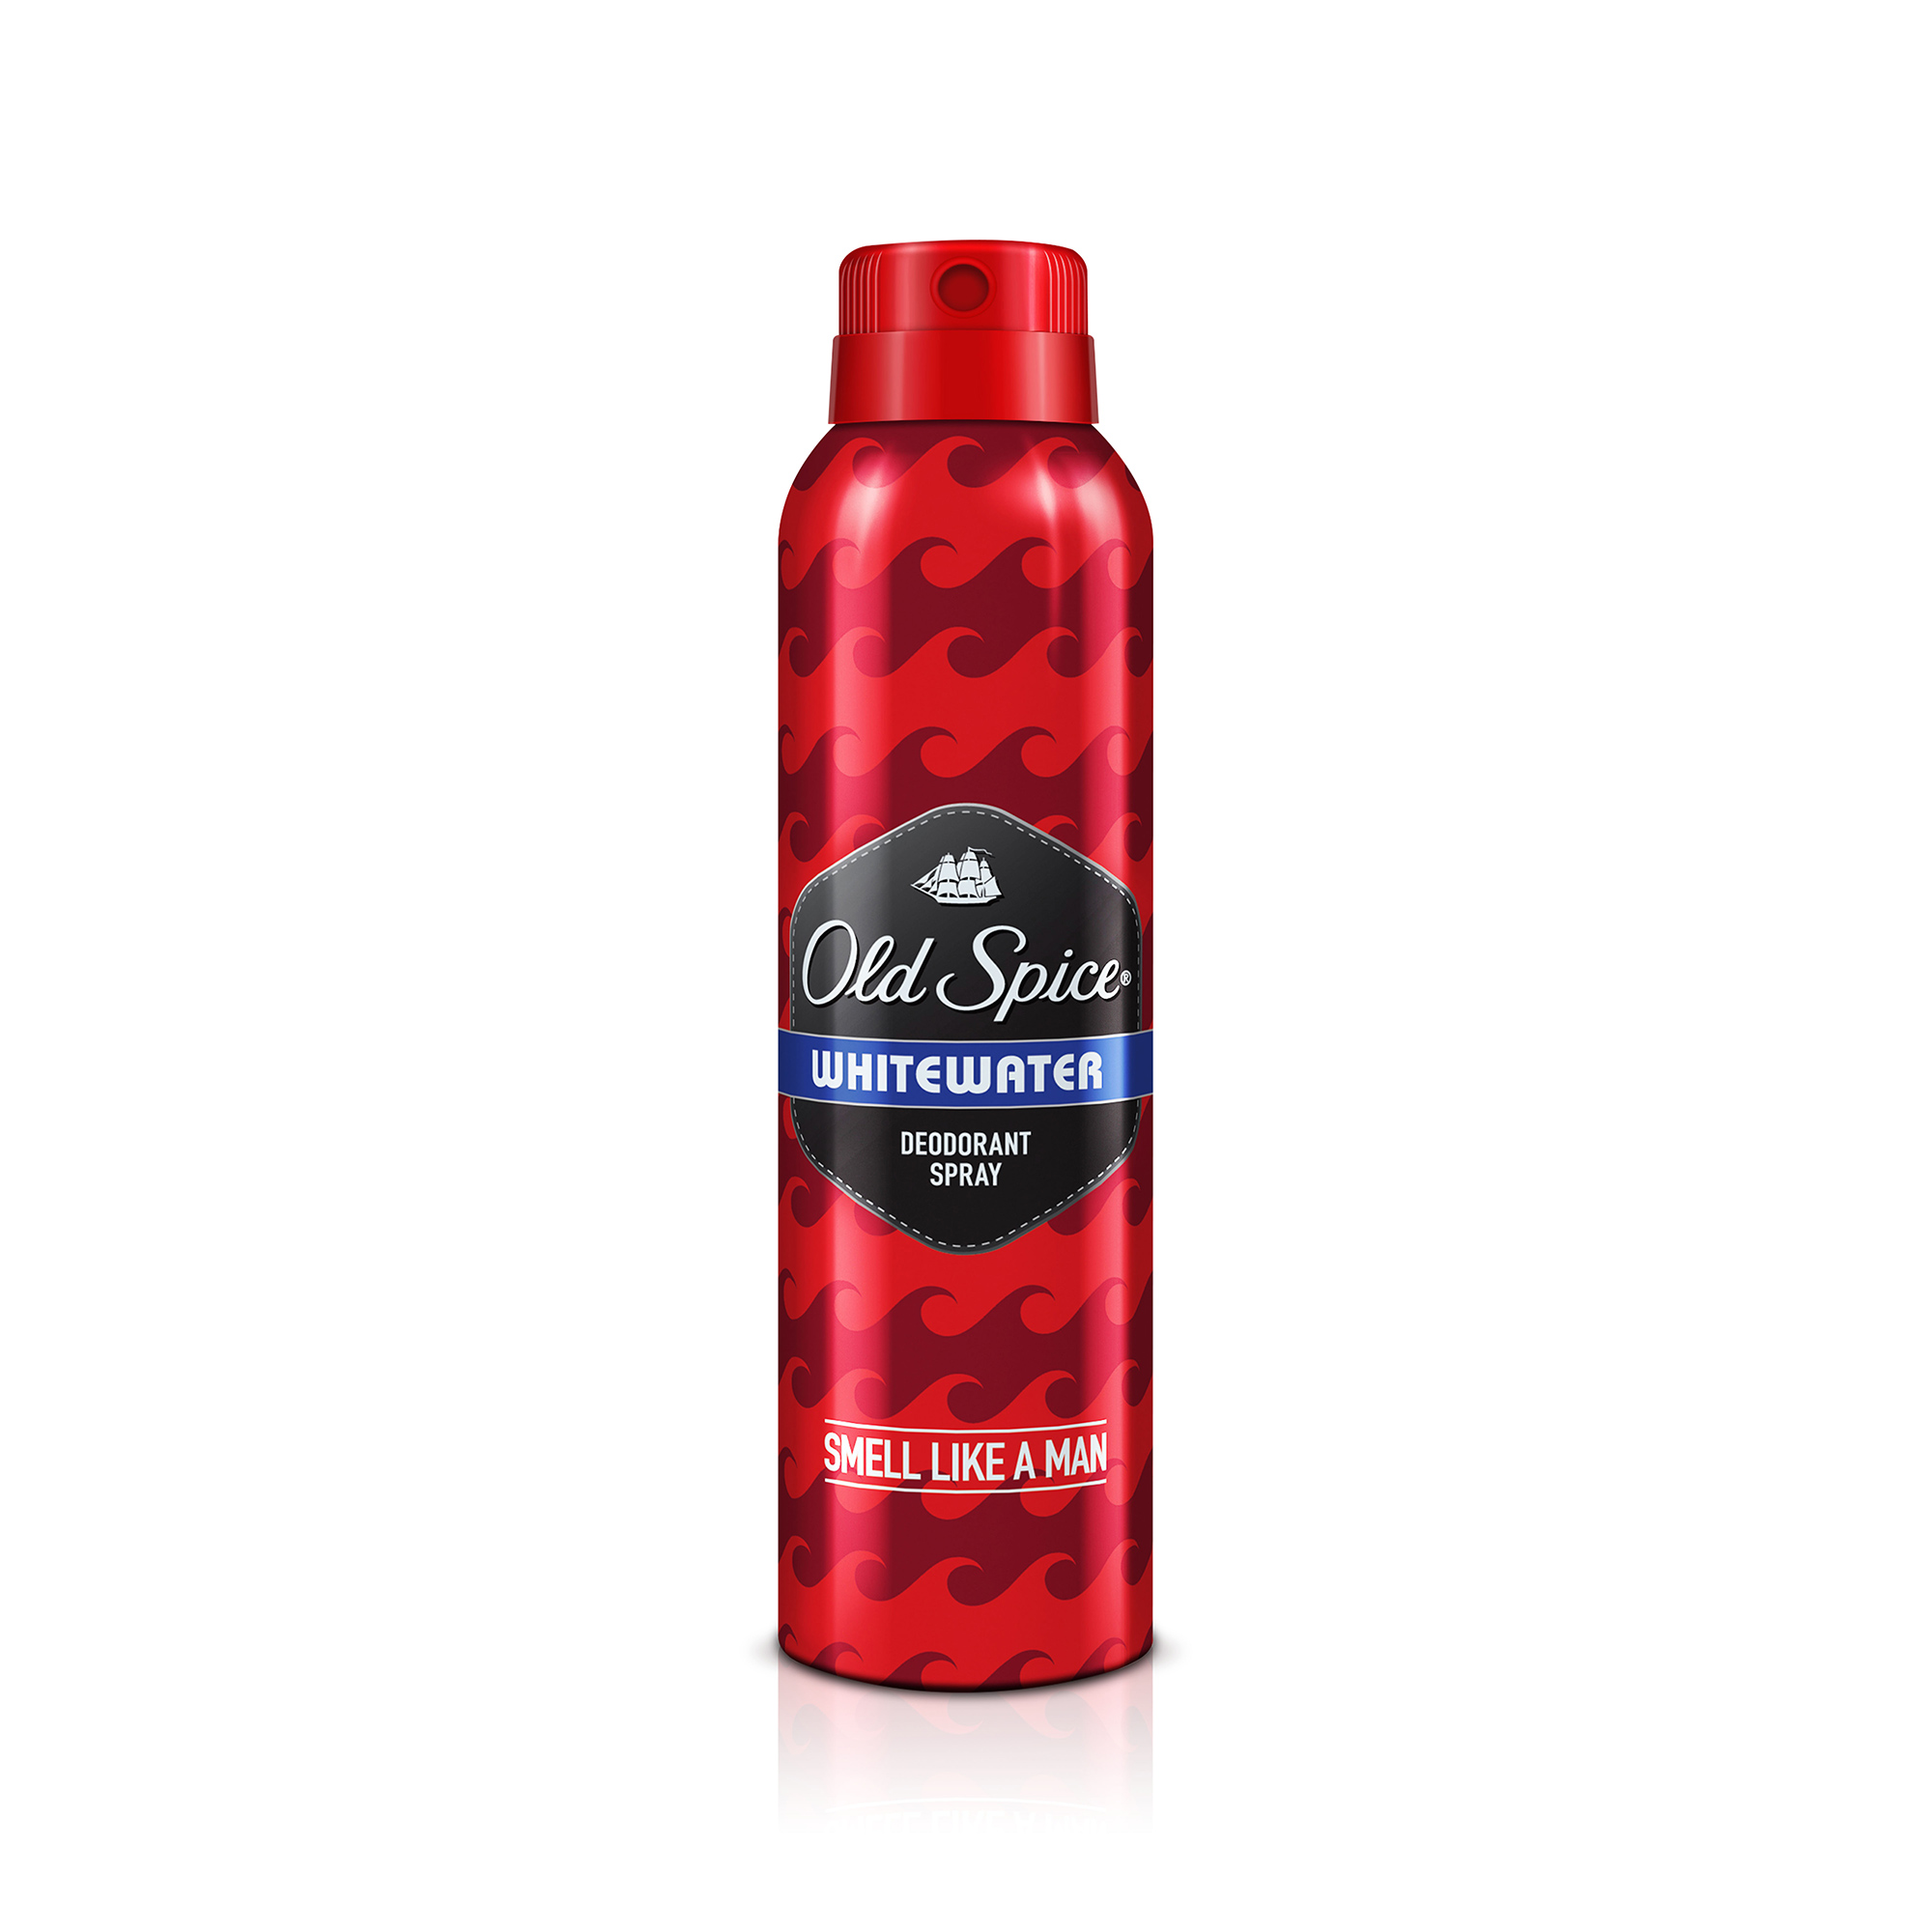 Old Spice Original Perfume Personal Grooming Anniversary Gift Set for Men